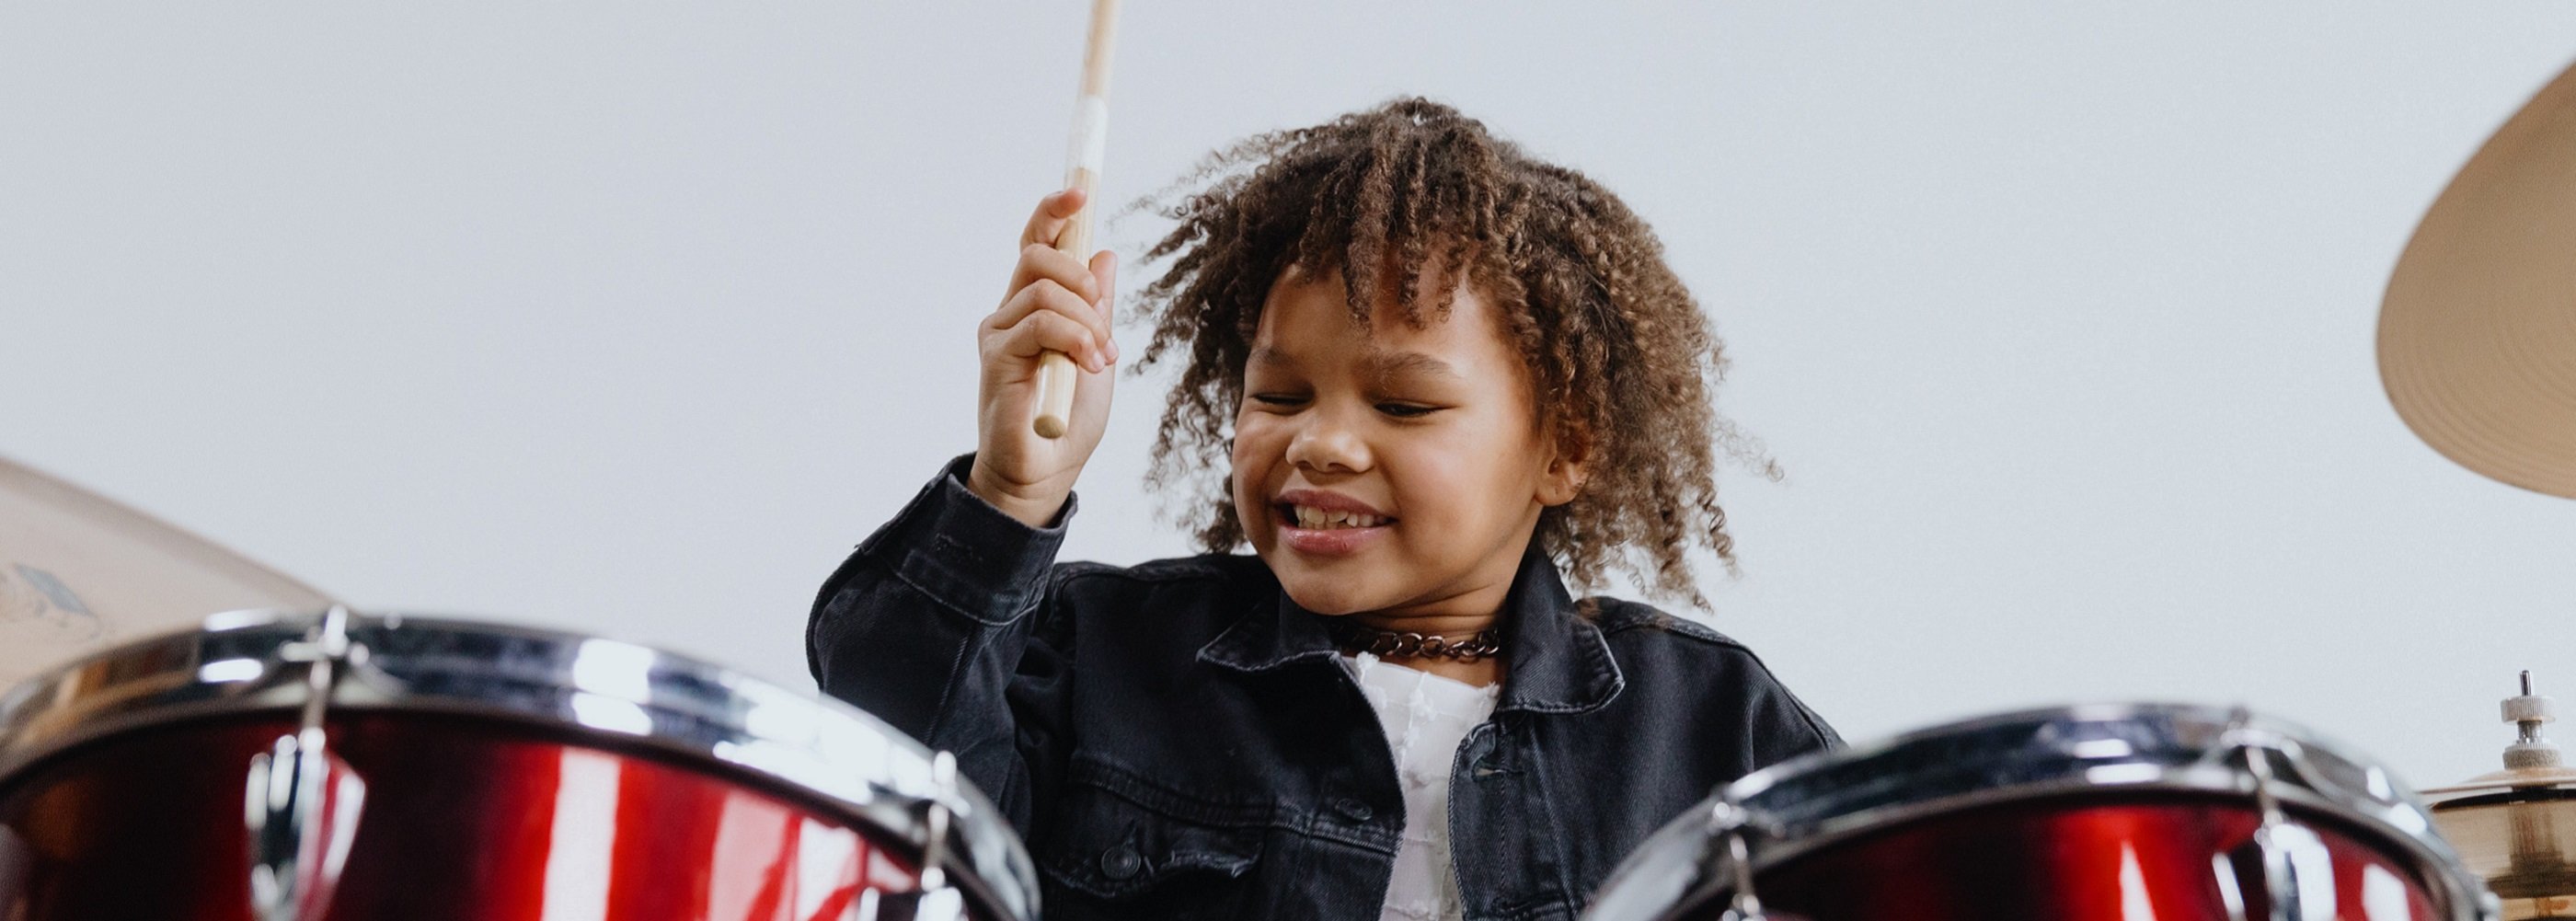 Young girl with brown, afro hair, white t-shirt, black denim jacket and chain necklace holding up a drumstick as she plays a red drum kit